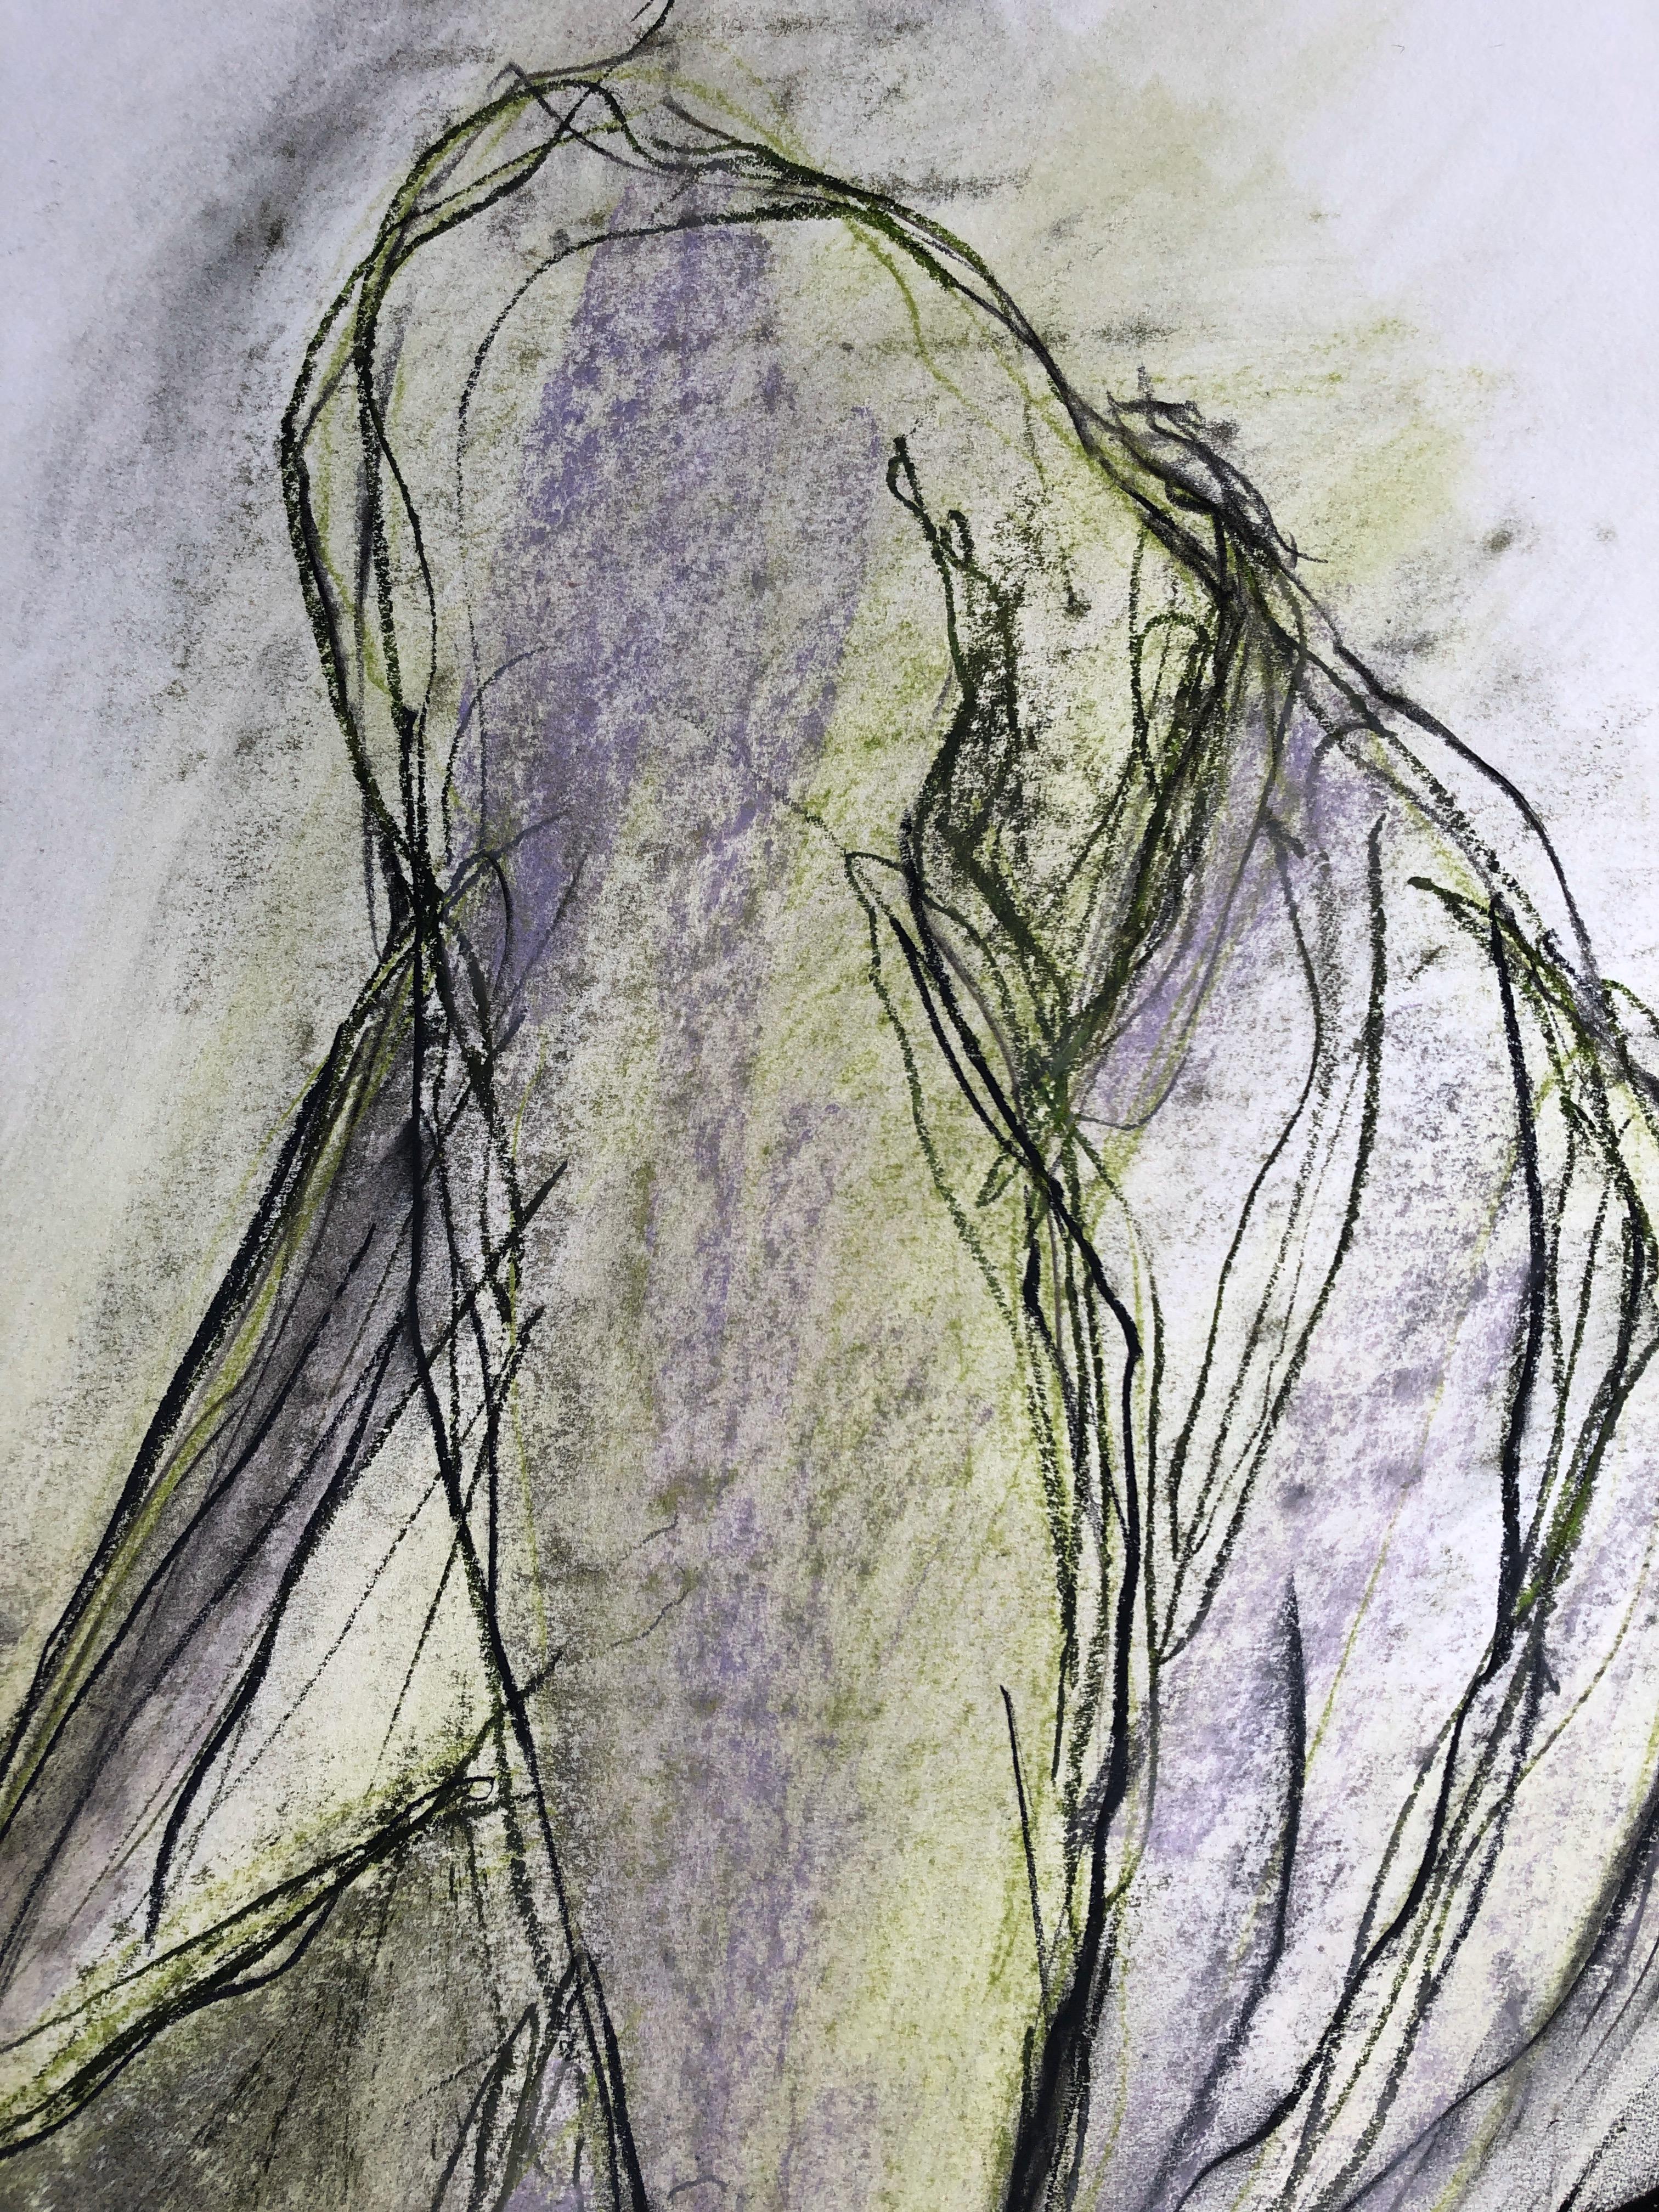 Man In Sarong. Contemporary Mixed Media on paper - Art by Angela Lyle